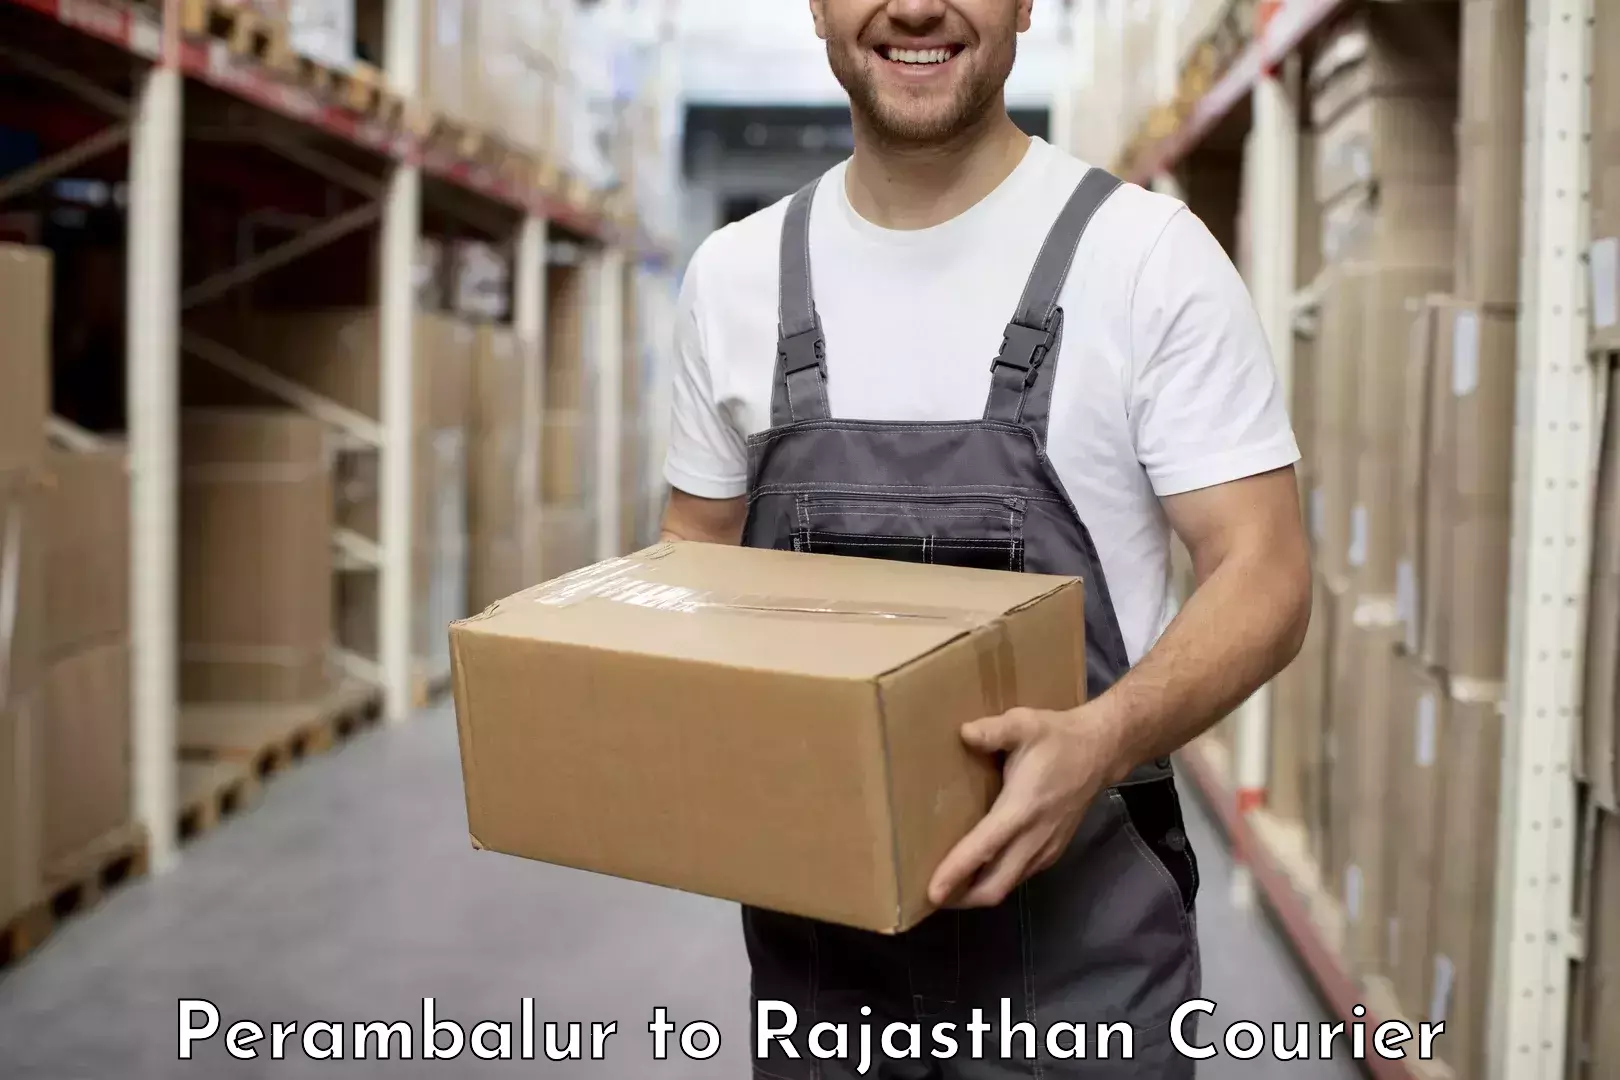 Package delivery network Perambalur to Yeswanthapur